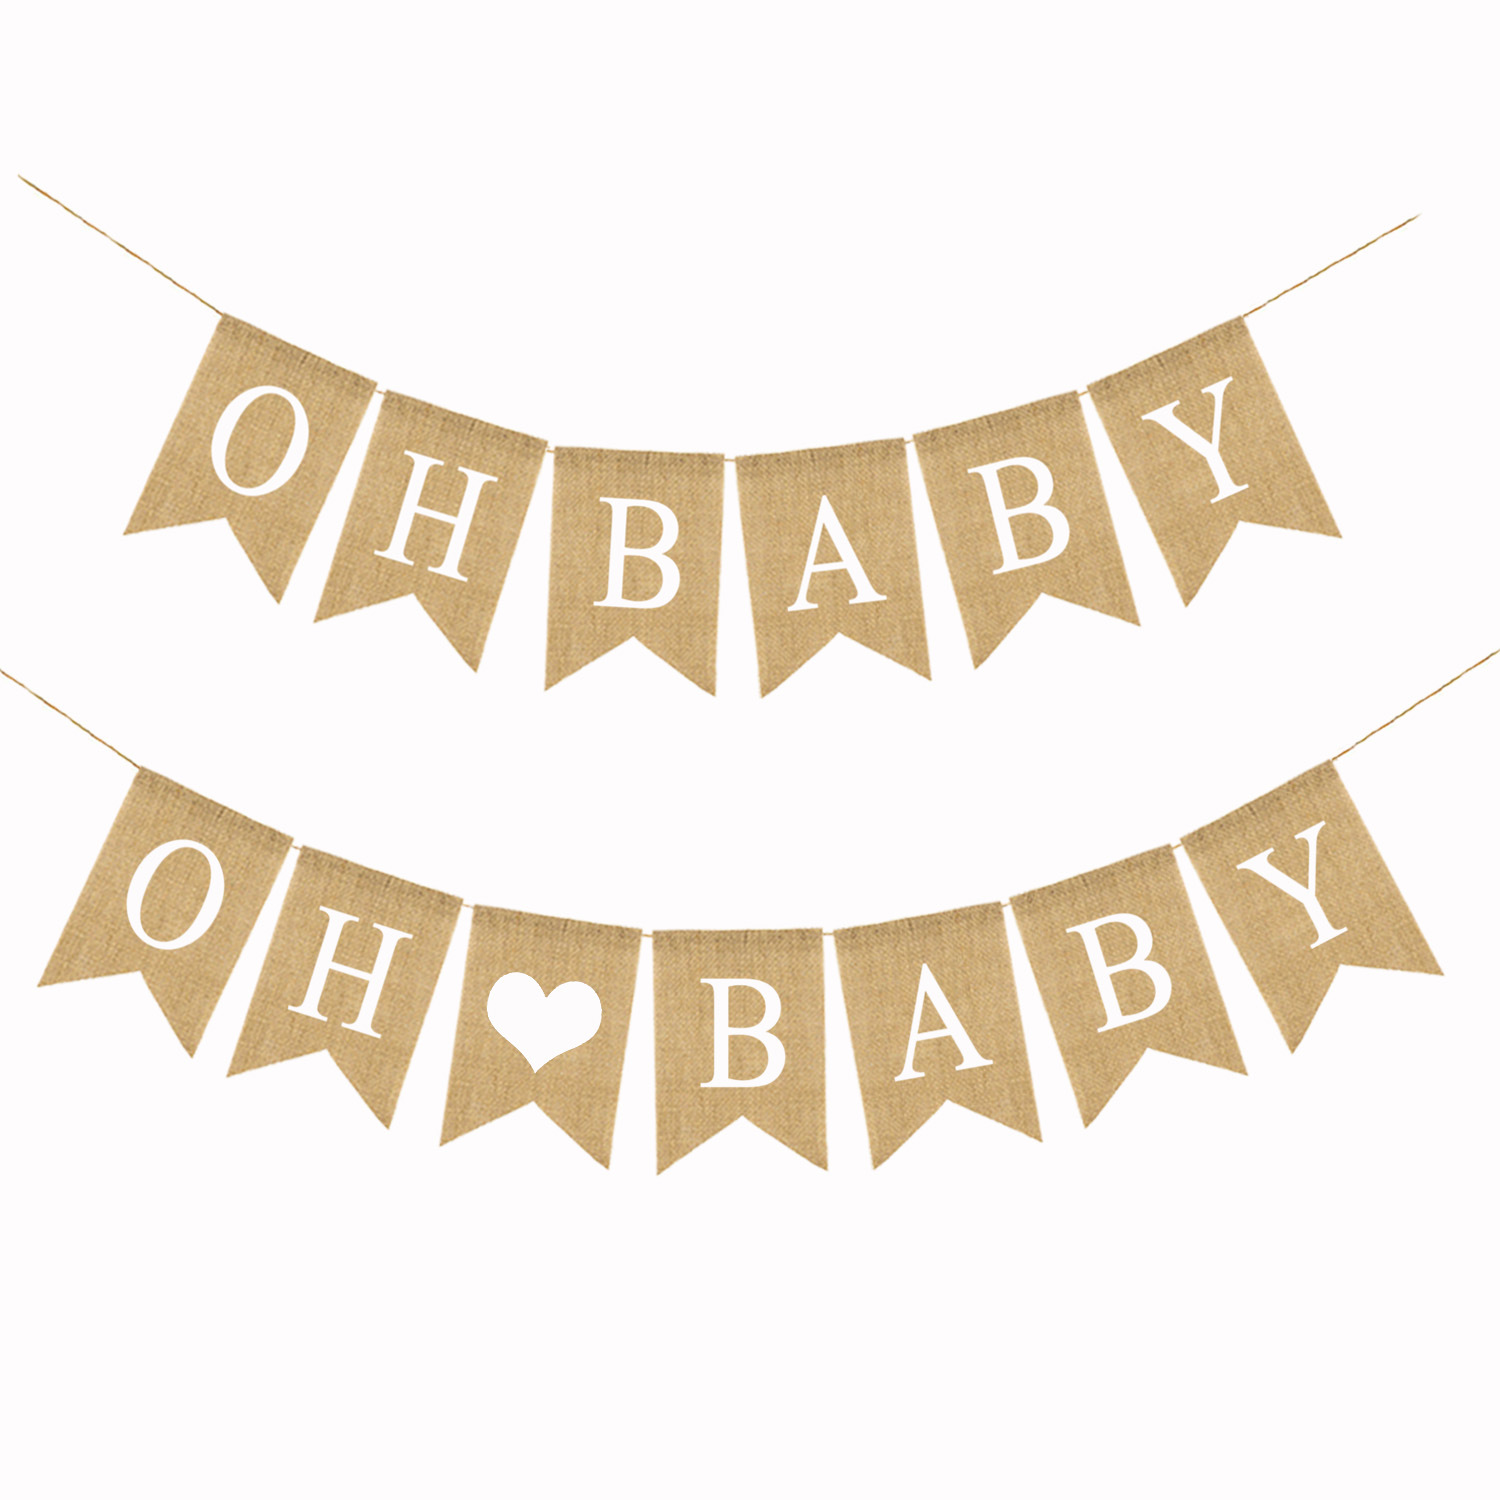 Baby Full-Year Party Festival Decoration Jute Pennant DIY Handmade Linen Hanging Flag Oh Baby Swallowtail Flag